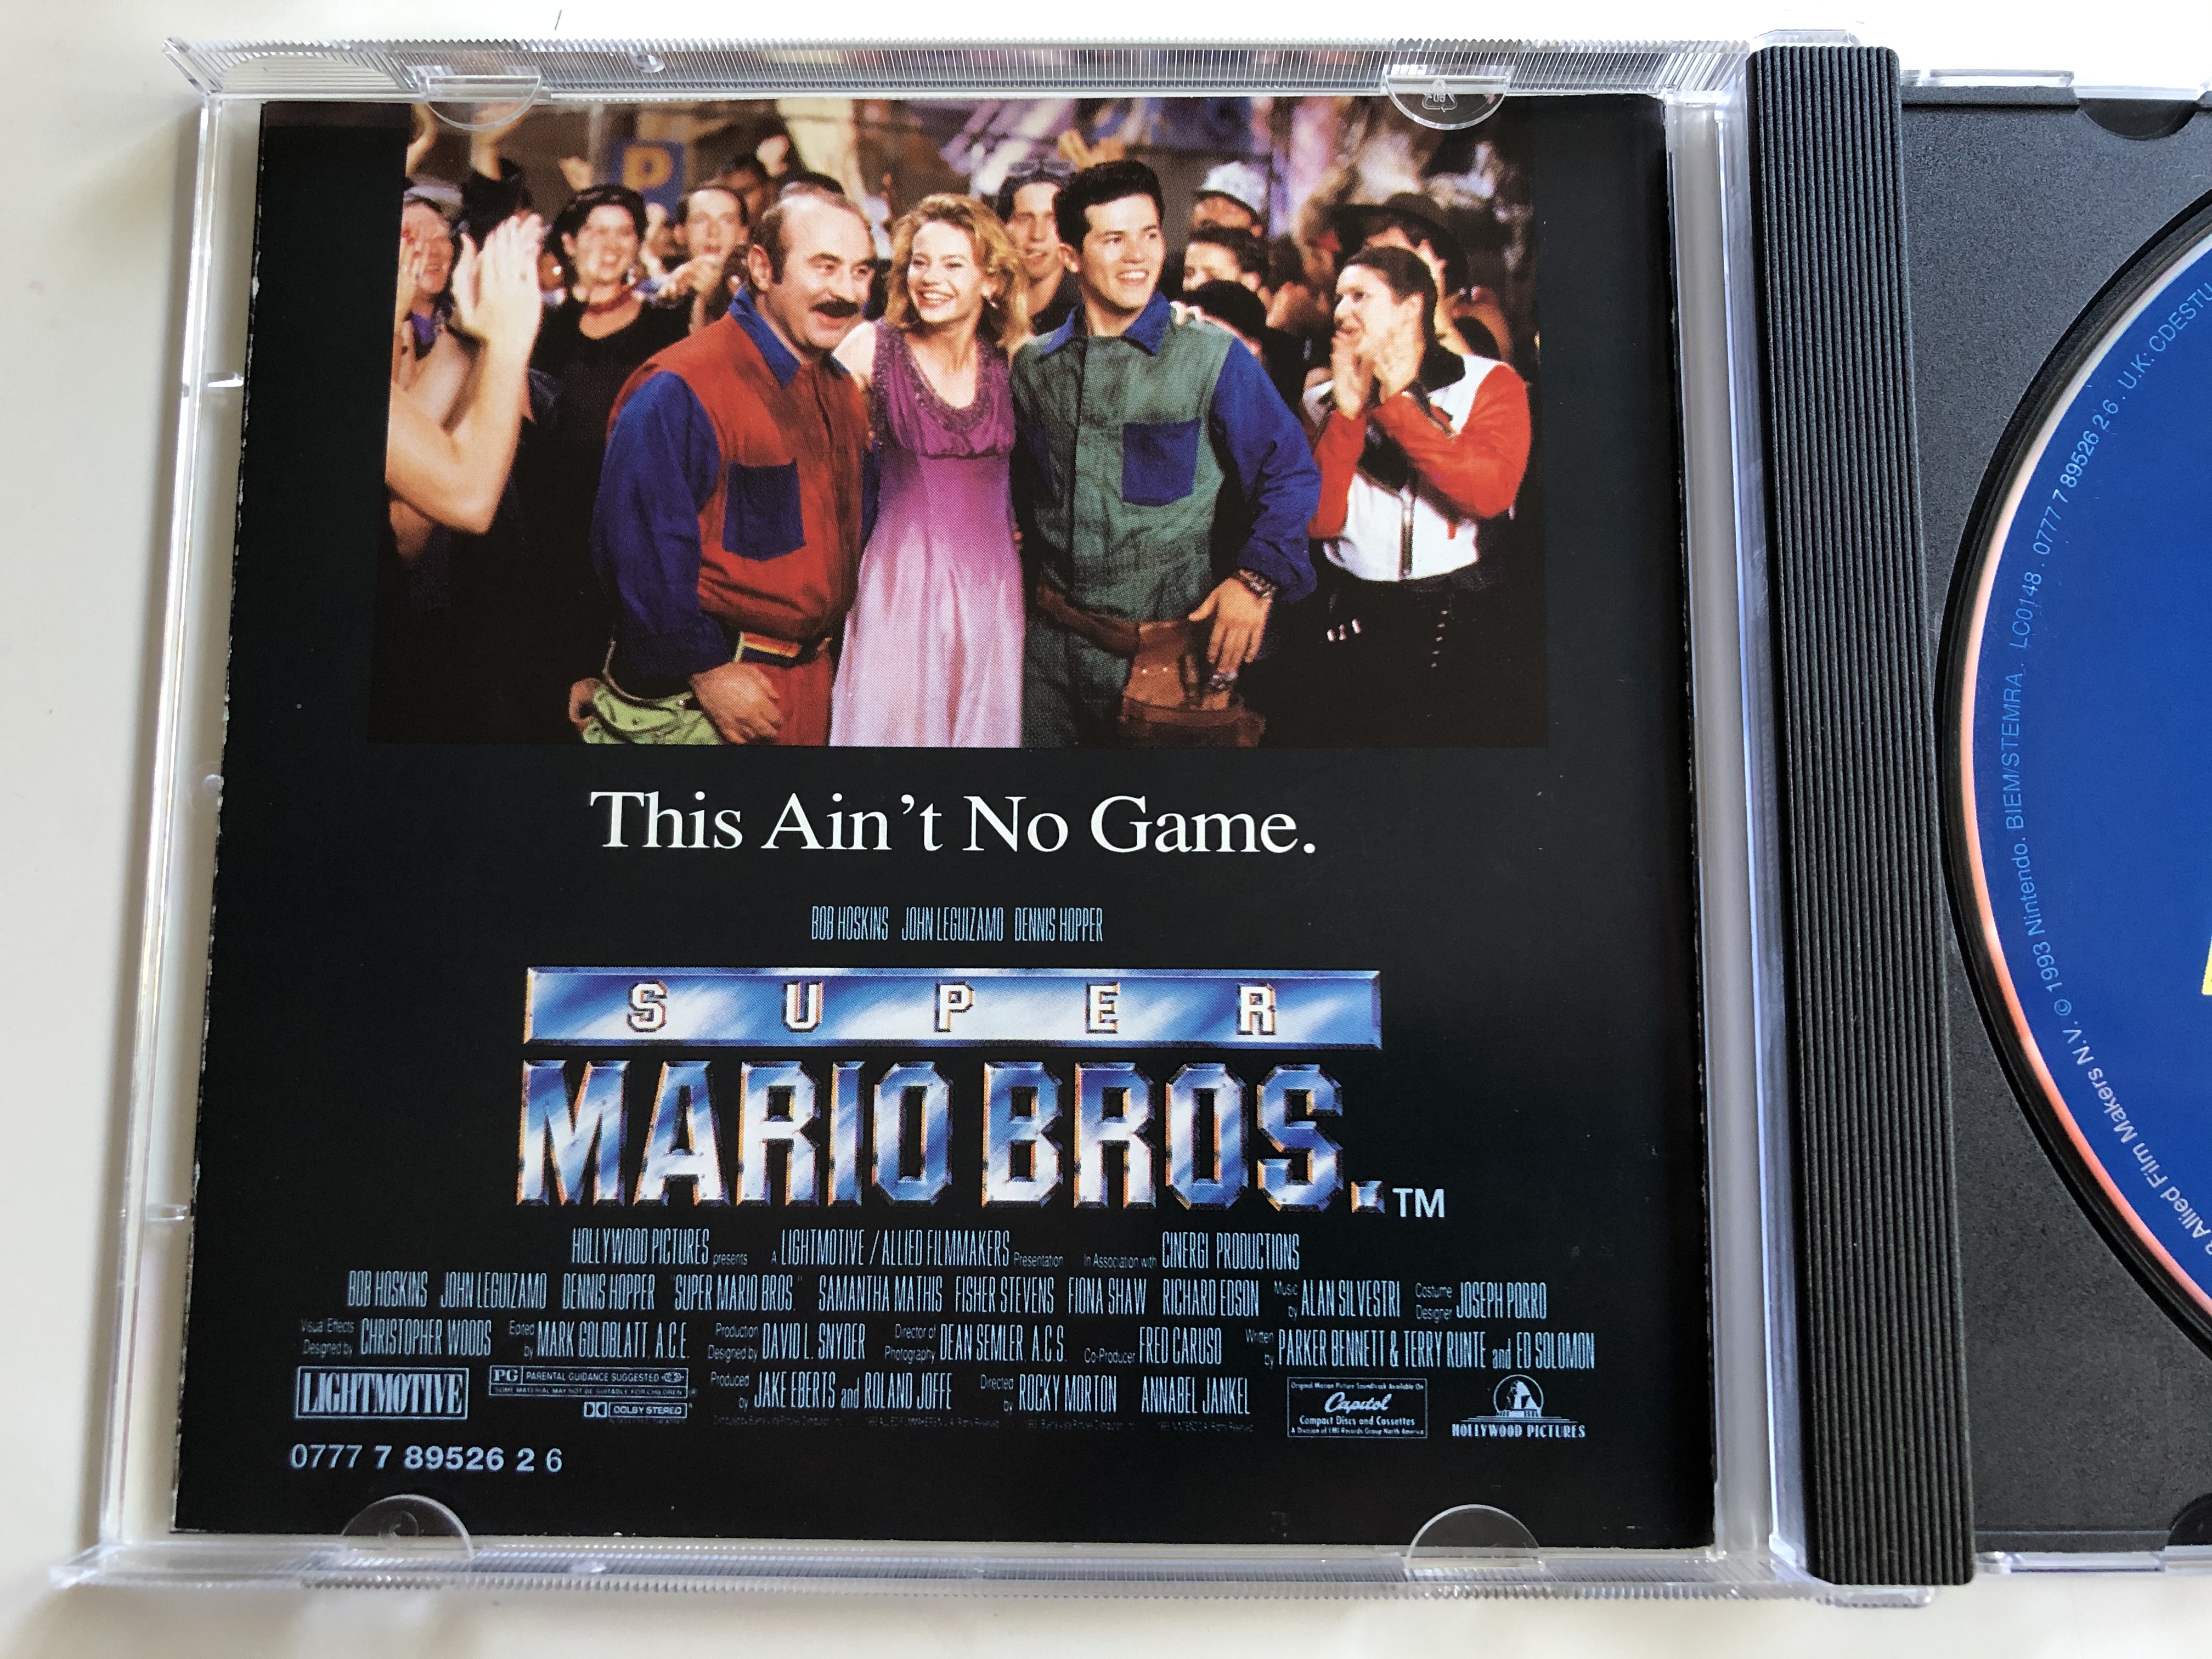 original-motion-picture-soundtrack-super-mario-bros.-featuring-music-from-roxette-extreme-divinlyls-megadeth-george-clinton-joe-satriani-queen-charles-eddie-marky-mark-us3-tracie-.jpg